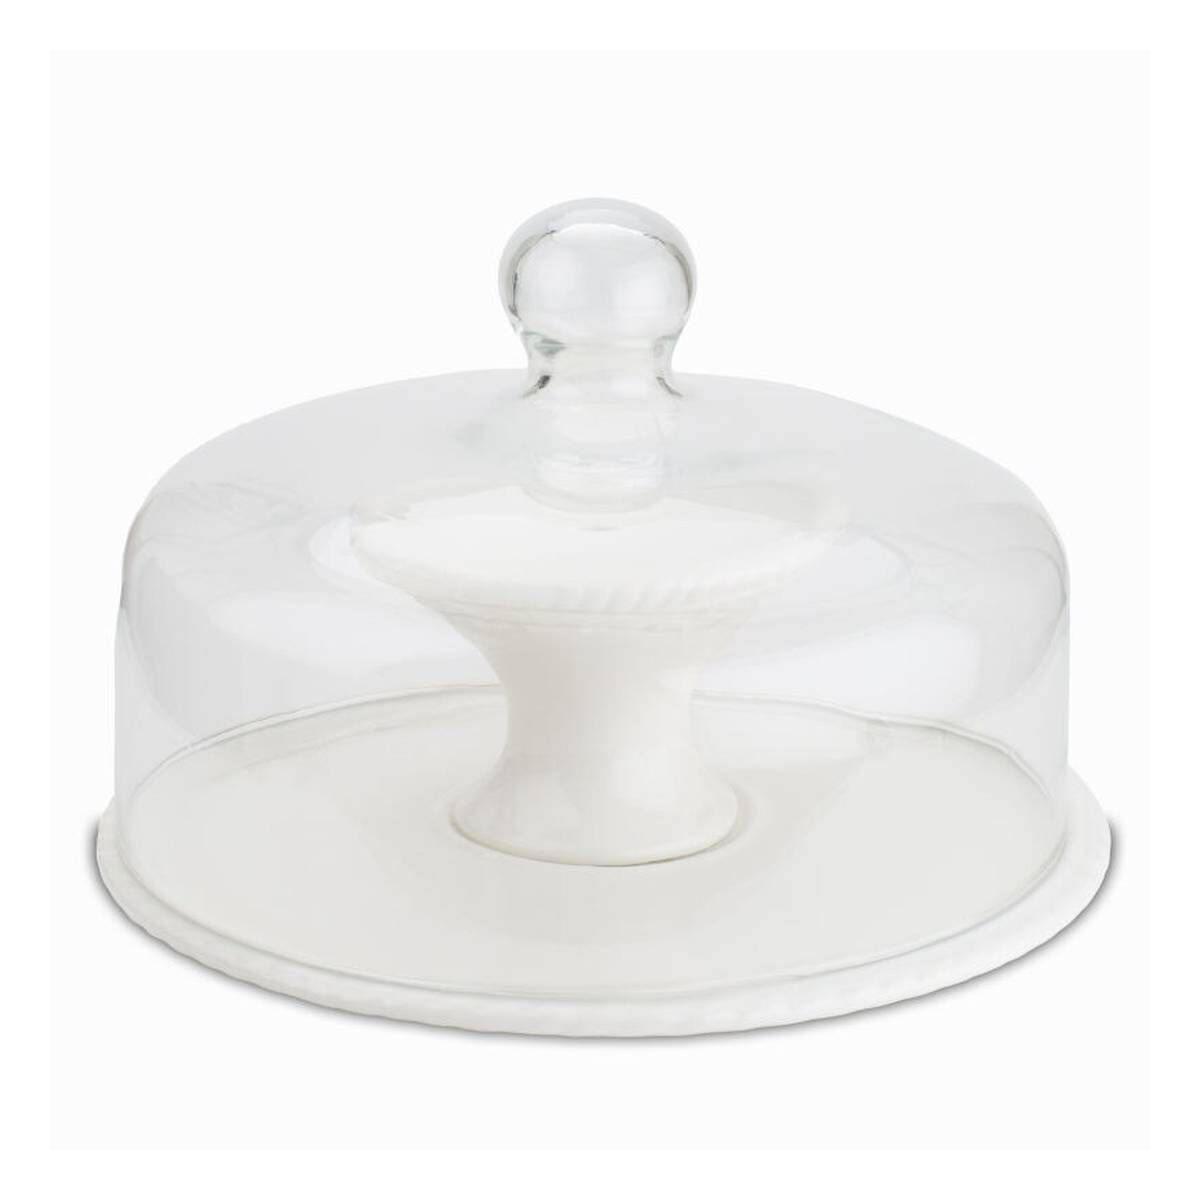 Essential Home Multi Use Glass Cake Stand